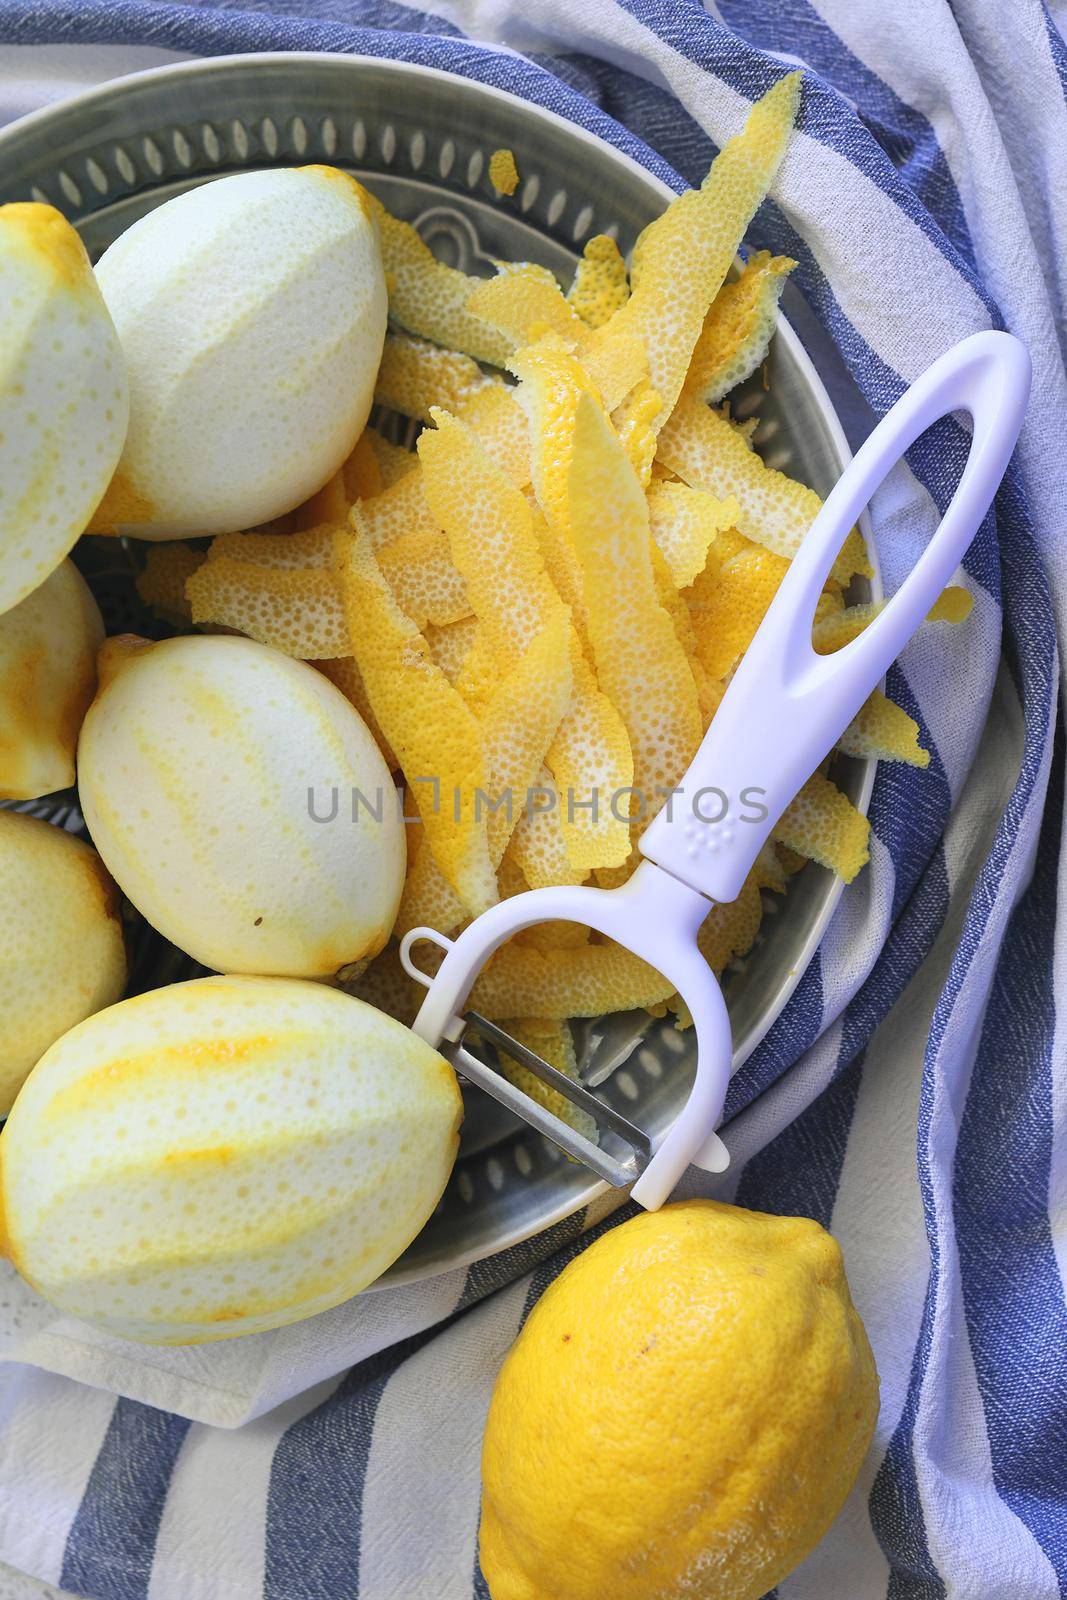 Lemon fruits and peeled strips for zest or making limoncello. Peeler, lemons and zest. Copy space, selected focus. Vertical image